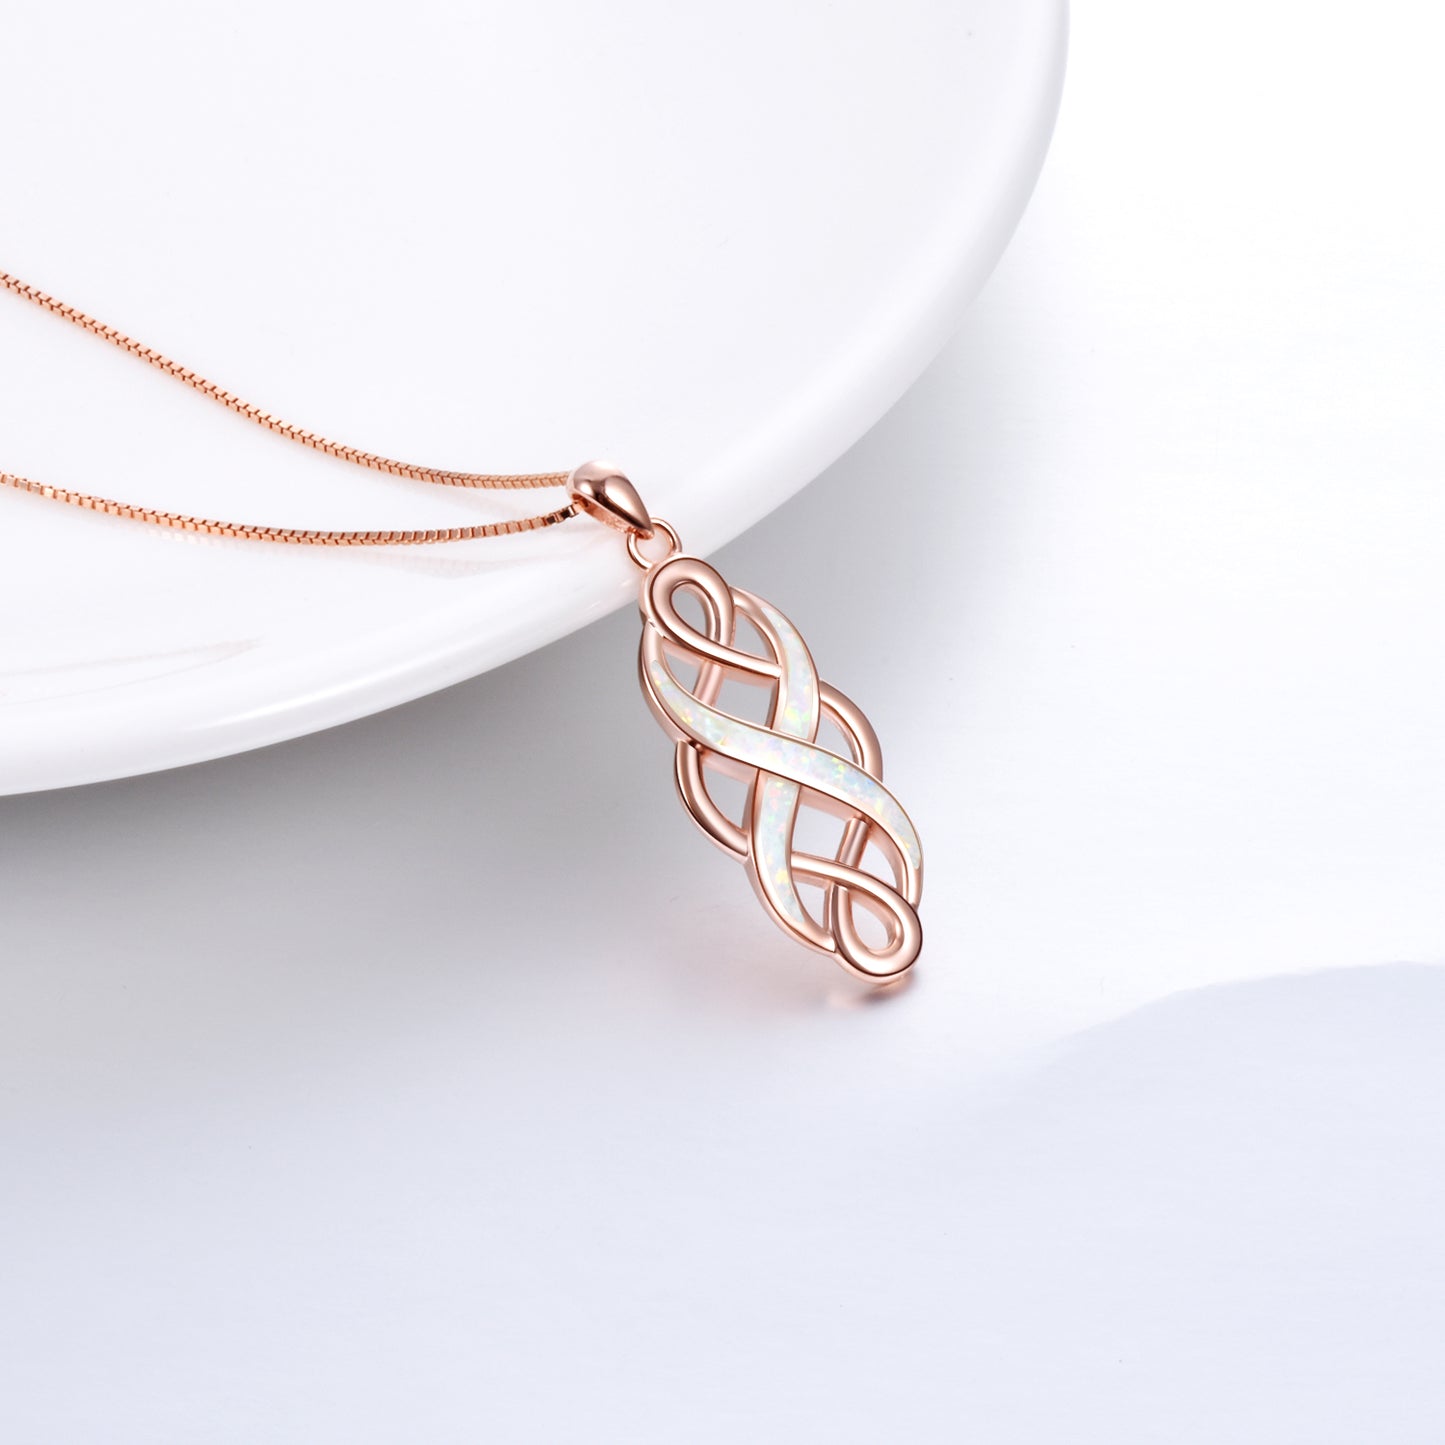 YFN S925 Irish Celtic Knot Opal Pendant Necklace Infinity Love Necklace Gift for Her  (Gift Box included)